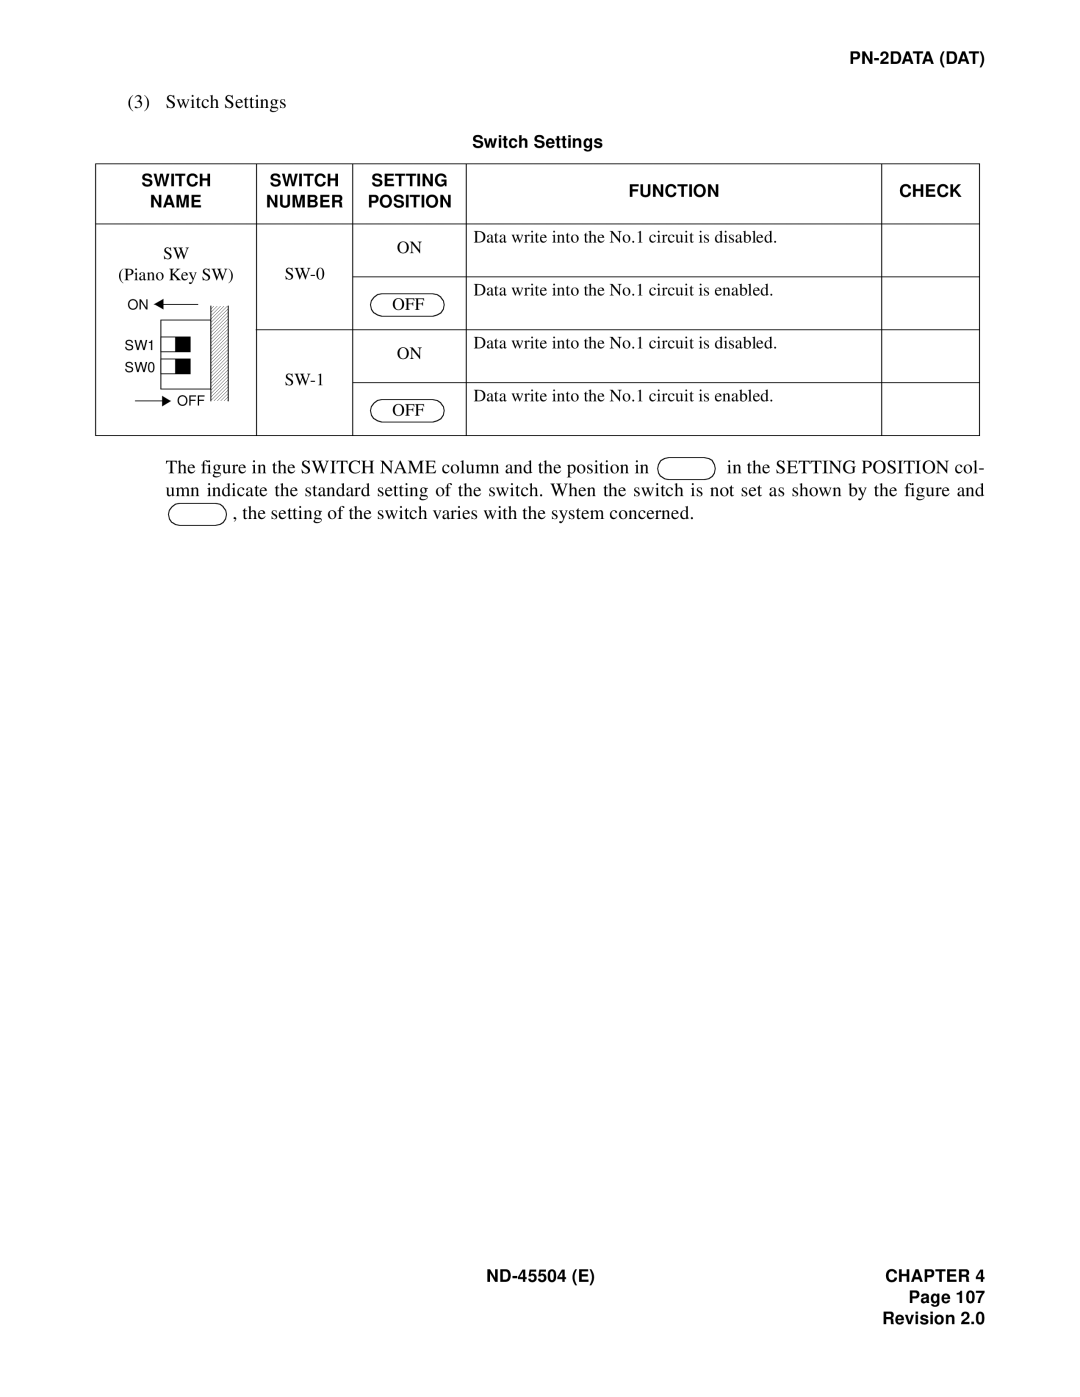 NEC 2000 IVS manual Data write into the No.1 circuit is disabled 